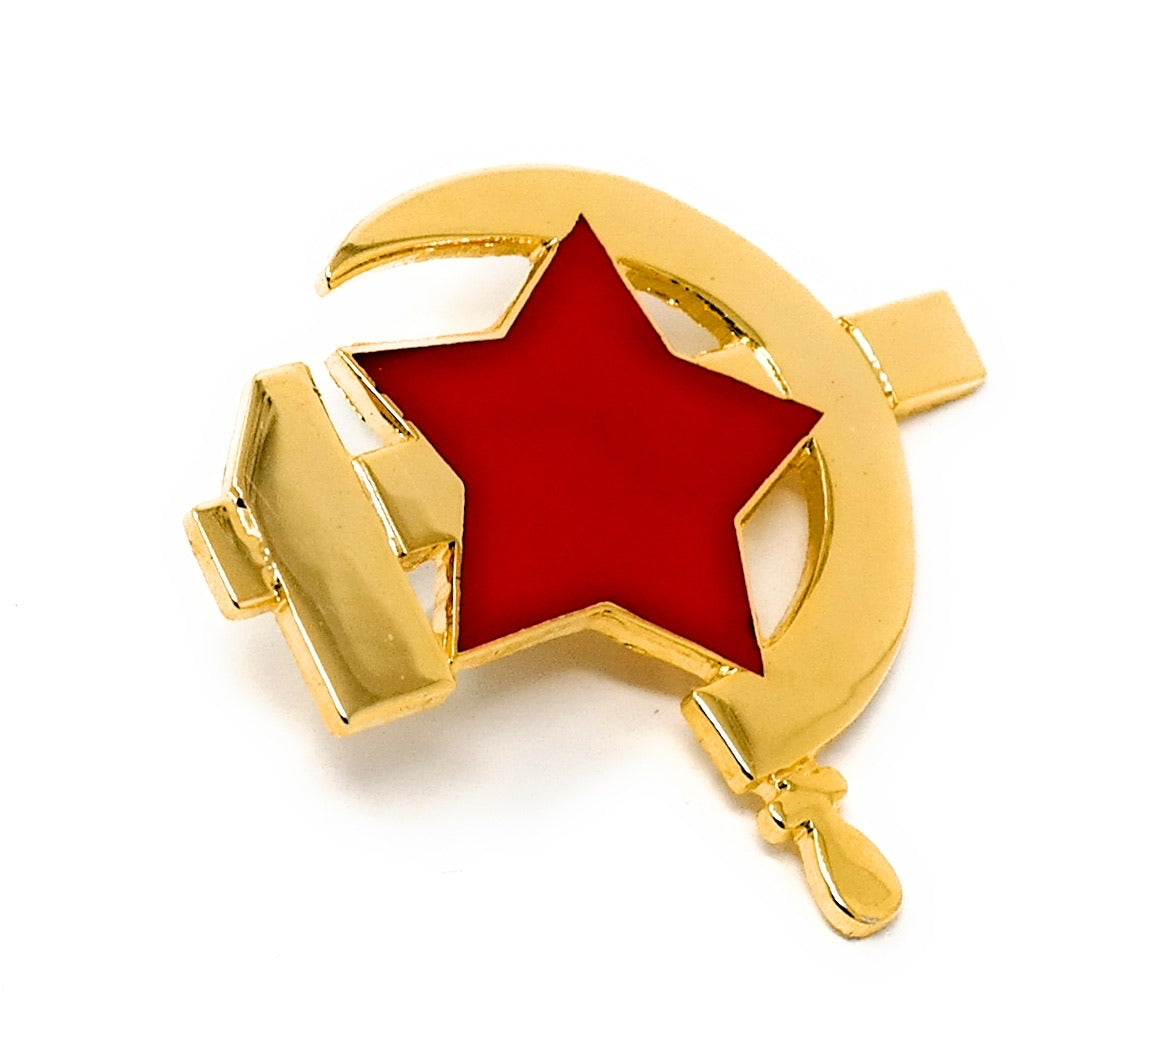 USSR Hammer and Sickle  Collectable Lapel Pin